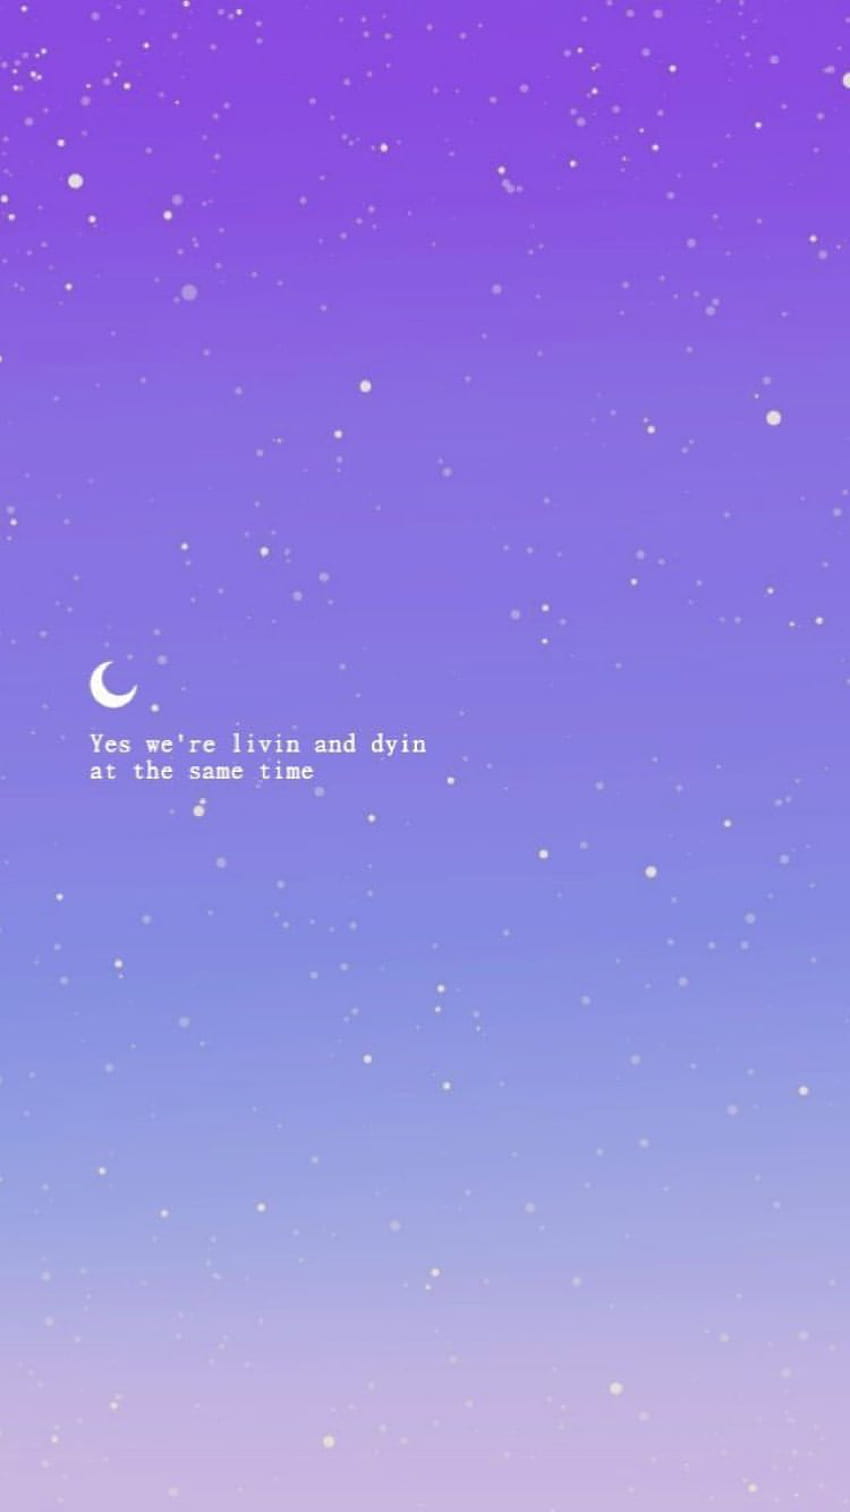 A purple and blue sky with a moon and stars - Purple quotes